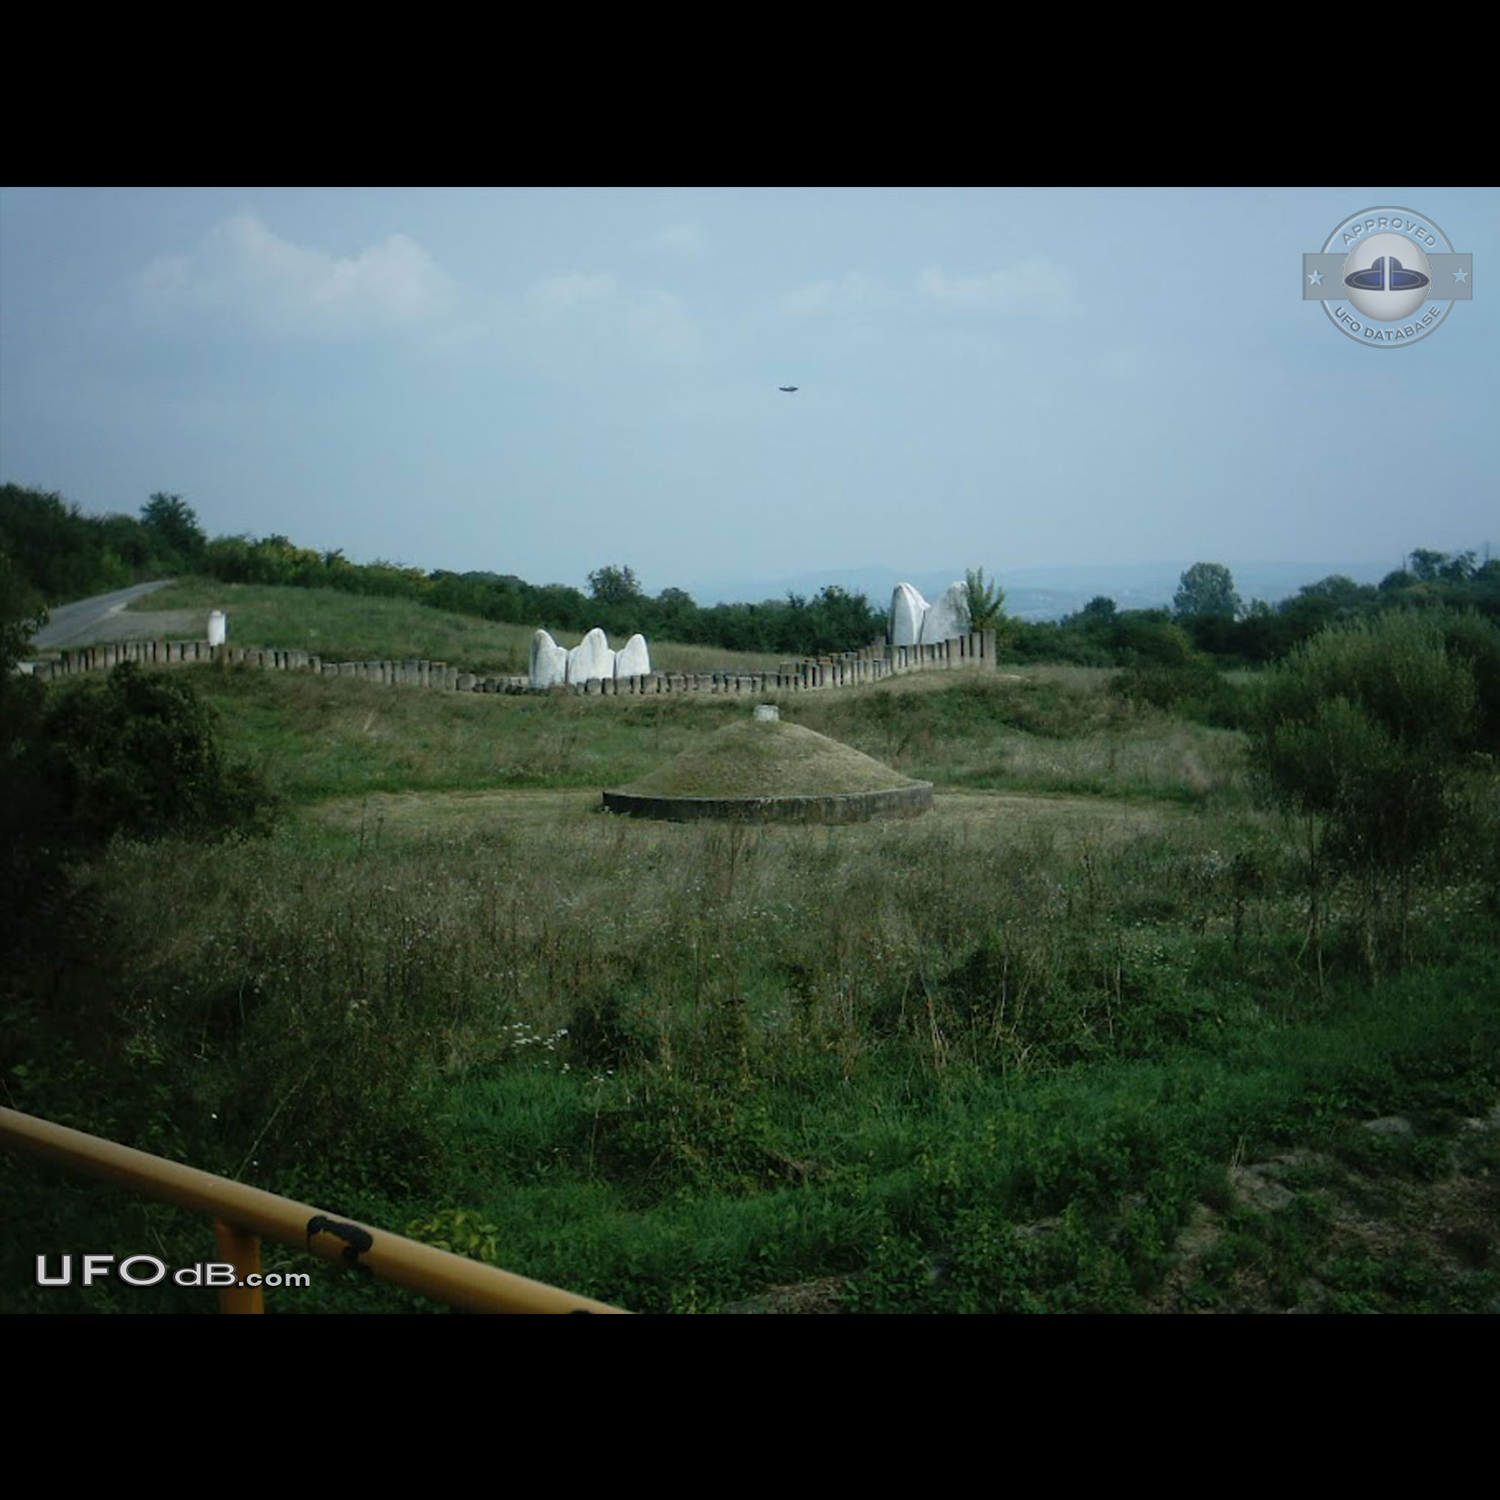 Monument picture reveals passing saucer UFO in Kragujevac, Serbia 2004 UFO Picture #457-1